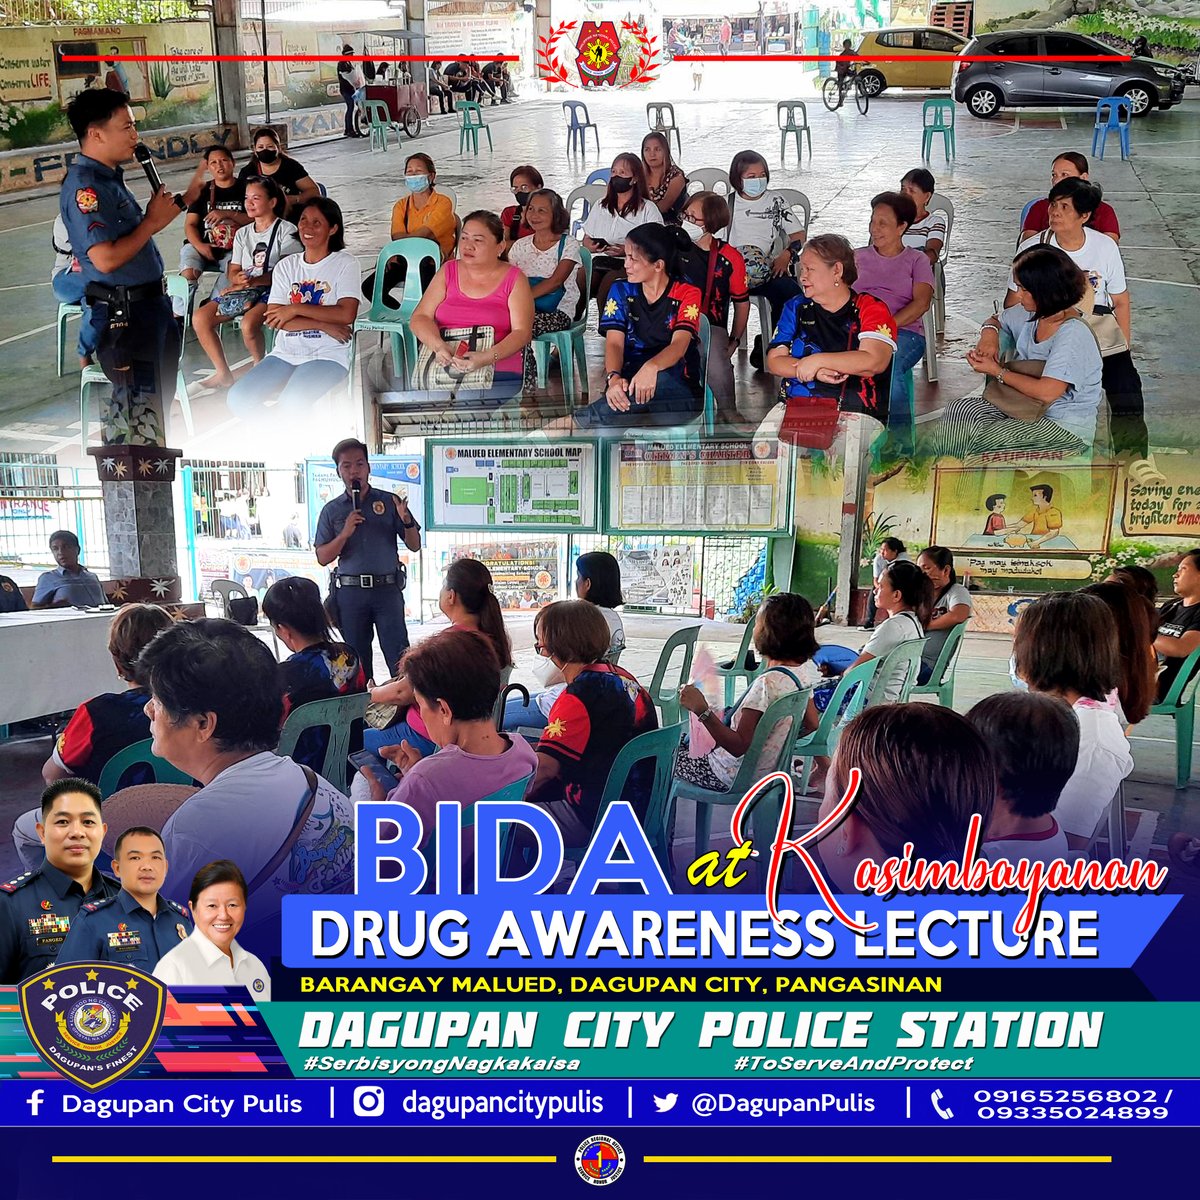 Pat Allan Dela Vega Jr, Asst. Operation PNCO of Dagupan CPS, under the supervision of PLTCOL BRENDON B PALISOC, OIC, conducted drug awareness lecture at the KASIMBAYANAN Weekly Interactive Meeting in Barangay Malued, Dagupan City.